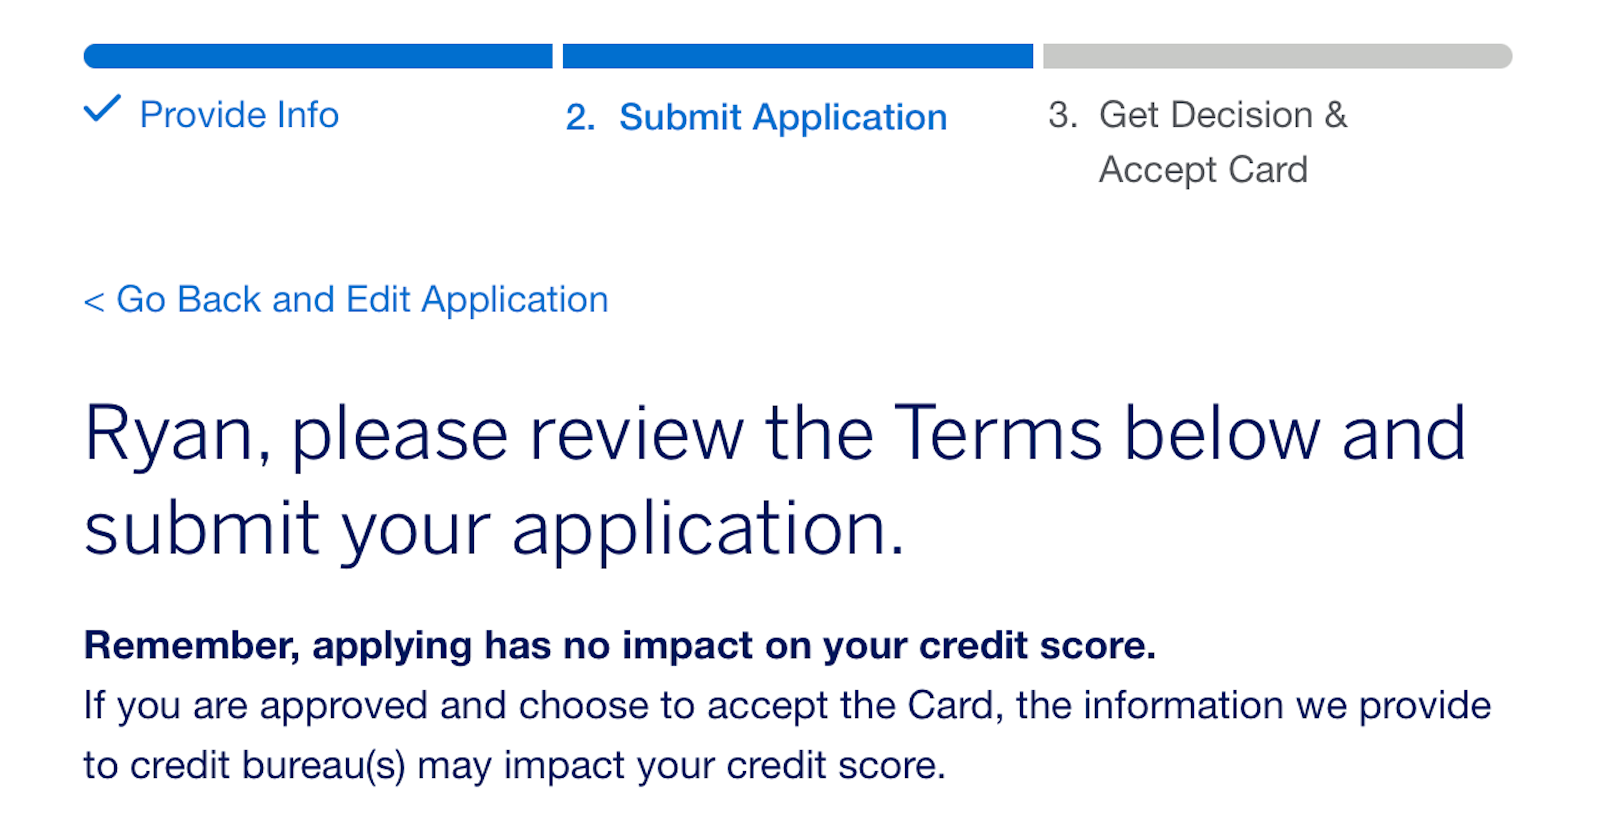 Screenshot of the application rules using Apply with Confidence on the Amex website